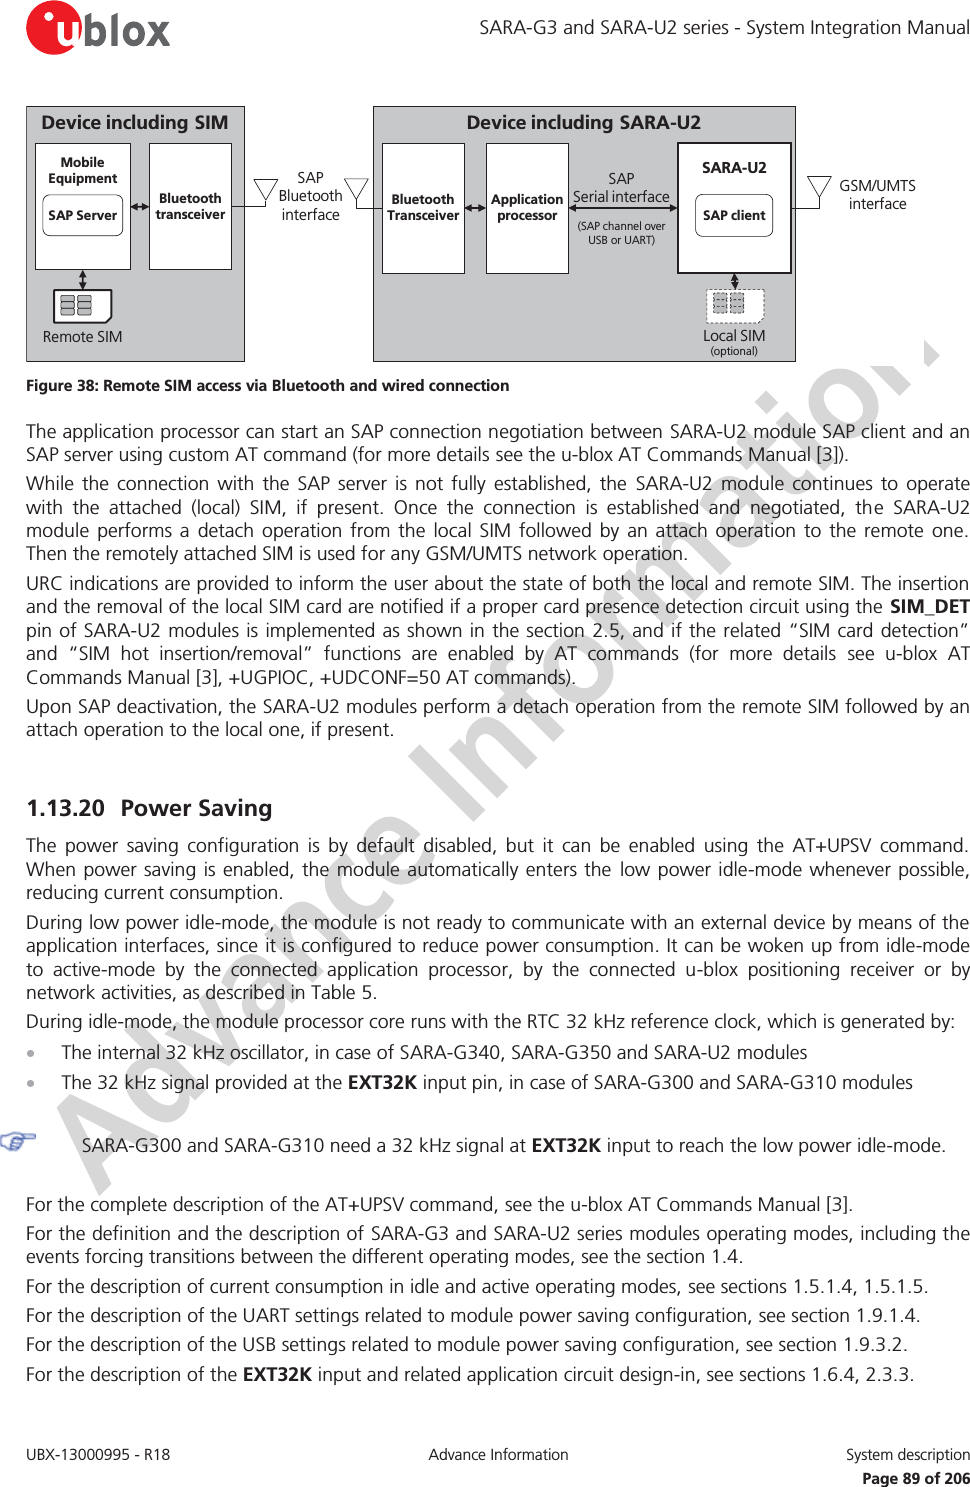 SARA-G3 and SARA-U2 series - System Integration Manual UBX-13000995 - R18  Advance Information  System description   Page 89 of 206 Device including SARA-U2SAP              Serial interface(SAP channel over   USB or UART)GSM/UMTS interfaceLocal SIM(optional)SARA-U2SAP clientApplicationprocessorSAP  Bluetooth interfaceBluetoothTransceiverDevice including SIMRemote SIMMobileEquipmentSAP ServerBluetoothtransceiver Figure 38: Remote SIM access via Bluetooth and wired connection The application processor can start an SAP connection negotiation between SARA-U2 module SAP client and an SAP server using custom AT command (for more details see the u-blox AT Commands Manual [3]). While the connection with the SAP server is not fully established, the SARA-U2 module continues to operate with the attached (local) SIM, if present. Once the connection is established and negotiated, the SARA-U2 module performs a detach operation from the local SIM followed by an attach operation to the remote one. Then the remotely attached SIM is used for any GSM/UMTS network operation. URC indications are provided to inform the user about the state of both the local and remote SIM. The insertion and the removal of the local SIM card are notified if a proper card presence detection circuit using the SIM_DET pin of SARA-U2 modules is implemented as shown in the section 2.5, and if the related “SIM card detection” and “SIM hot insertion/removal” functions are enabled by AT commands (for more details see u-blox AT Commands Manual [3], +UGPIOC, +UDCONF=50 AT commands). Upon SAP deactivation, the SARA-U2 modules perform a detach operation from the remote SIM followed by an attach operation to the local one, if present.  1.13.20 Power Saving The power saving configuration is by default disabled, but it can be enabled using the AT+UPSV command. When power saving is enabled, the module automatically enters the low power idle-mode whenever possible, reducing current consumption. During low power idle-mode, the module is not ready to communicate with an external device by means of the application interfaces, since it is configured to reduce power consumption. It can be woken up from idle-mode to active-mode by the connected application processor, by the connected u-blox positioning receiver or by network activities, as described in Table 5. During idle-mode, the module processor core runs with the RTC 32 kHz reference clock, which is generated by: x The internal 32 kHz oscillator, in case of SARA-G340, SARA-G350 and SARA-U2 modules x The 32 kHz signal provided at the EXT32K input pin, in case of SARA-G300 and SARA-G310 modules   SARA-G300 and SARA-G310 need a 32 kHz signal at EXT32K input to reach the low power idle-mode.  For the complete description of the AT+UPSV command, see the u-blox AT Commands Manual [3]. For the definition and the description of SARA-G3 and SARA-U2 series modules operating modes, including the events forcing transitions between the different operating modes, see the section 1.4. For the description of current consumption in idle and active operating modes, see sections 1.5.1.4, 1.5.1.5. For the description of the UART settings related to module power saving configuration, see section 1.9.1.4. For the description of the USB settings related to module power saving configuration, see section 1.9.3.2. For the description of the EXT32K input and related application circuit design-in, see sections 1.6.4, 2.3.3. 